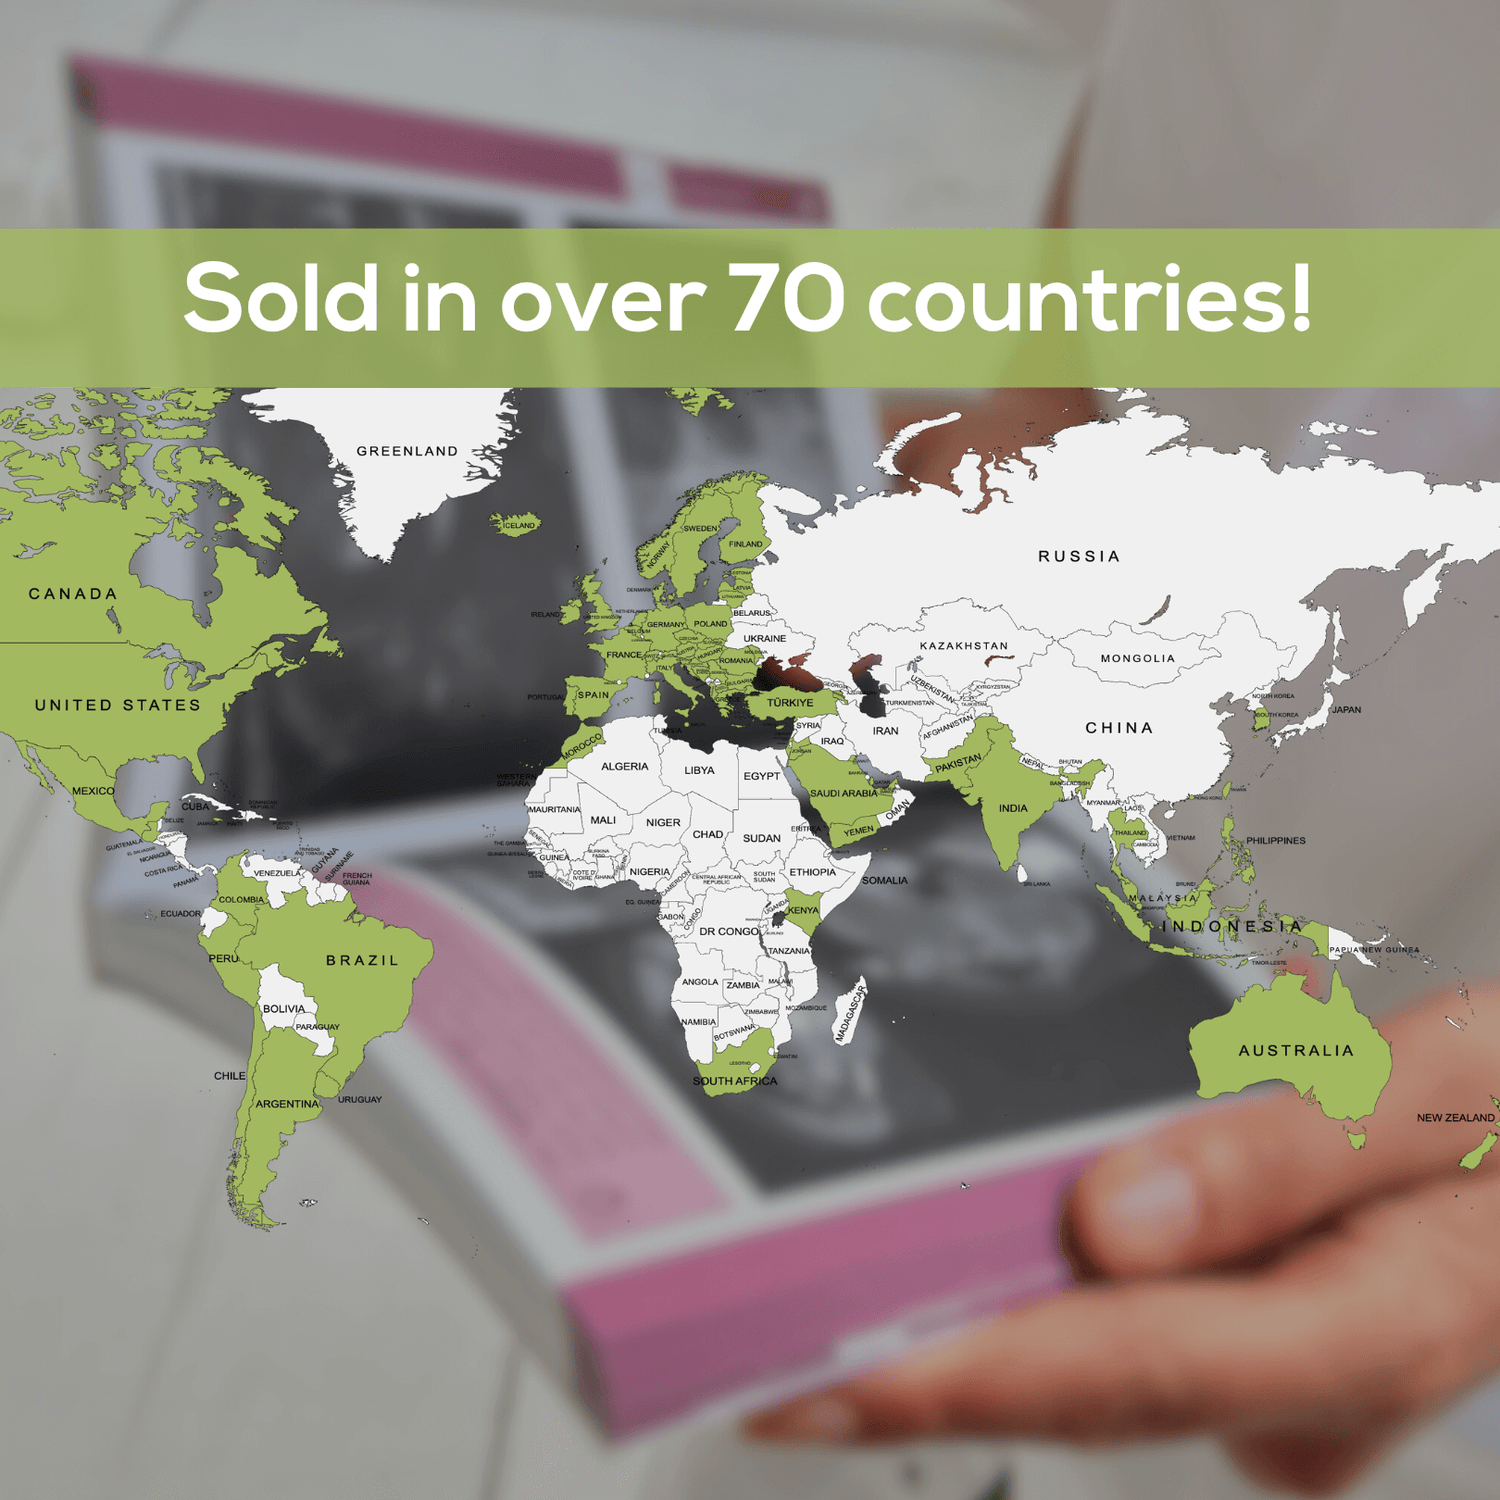 World map - Radiology pocket sold in over 70 countries